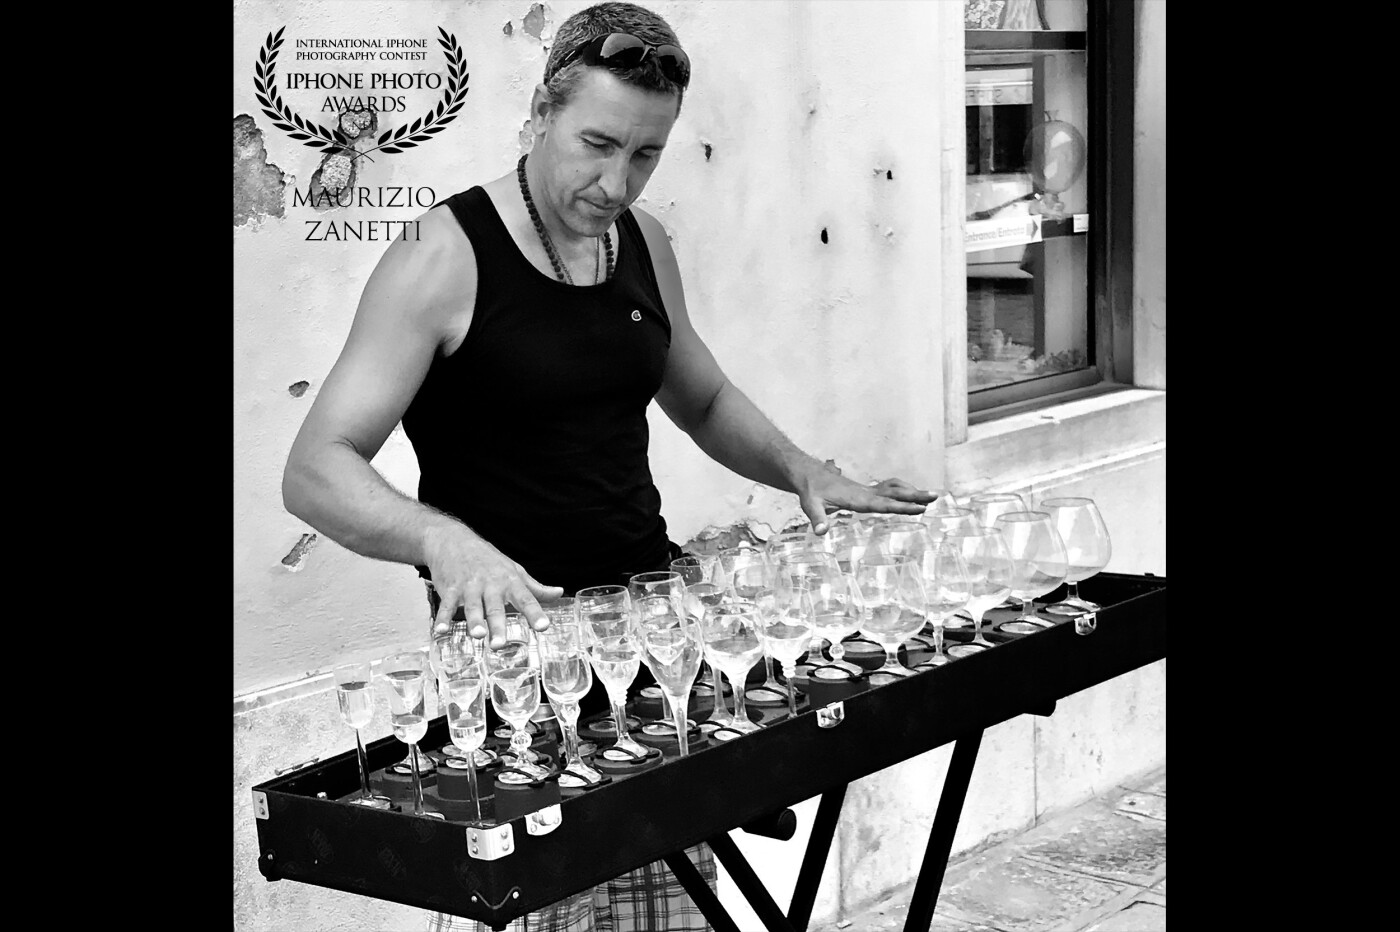 In the shadow of an old house in the beautiful Murano, a glass player gives the soundtrack to the island of glass. And the enchantment of sound is added to the charm of the glasses worked by generations of "master glassmakers" 